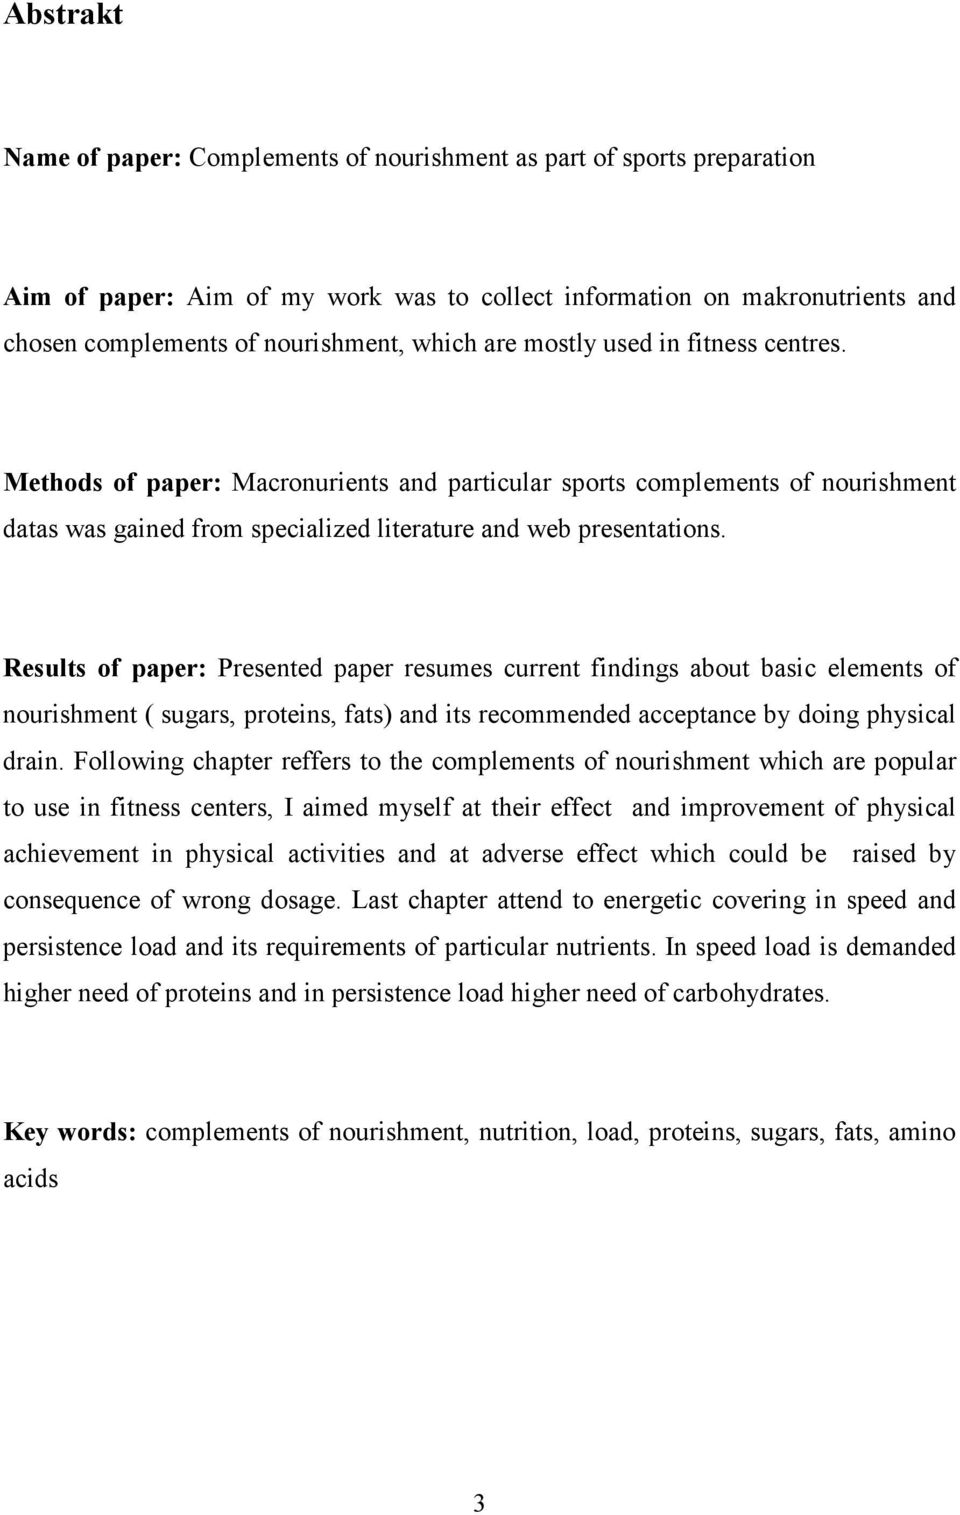 Results of paper: Presented paper resumes current findings about basic elements of nourishment ( sugars, proteins, fats) and its recommended acceptance by doing physical drain.